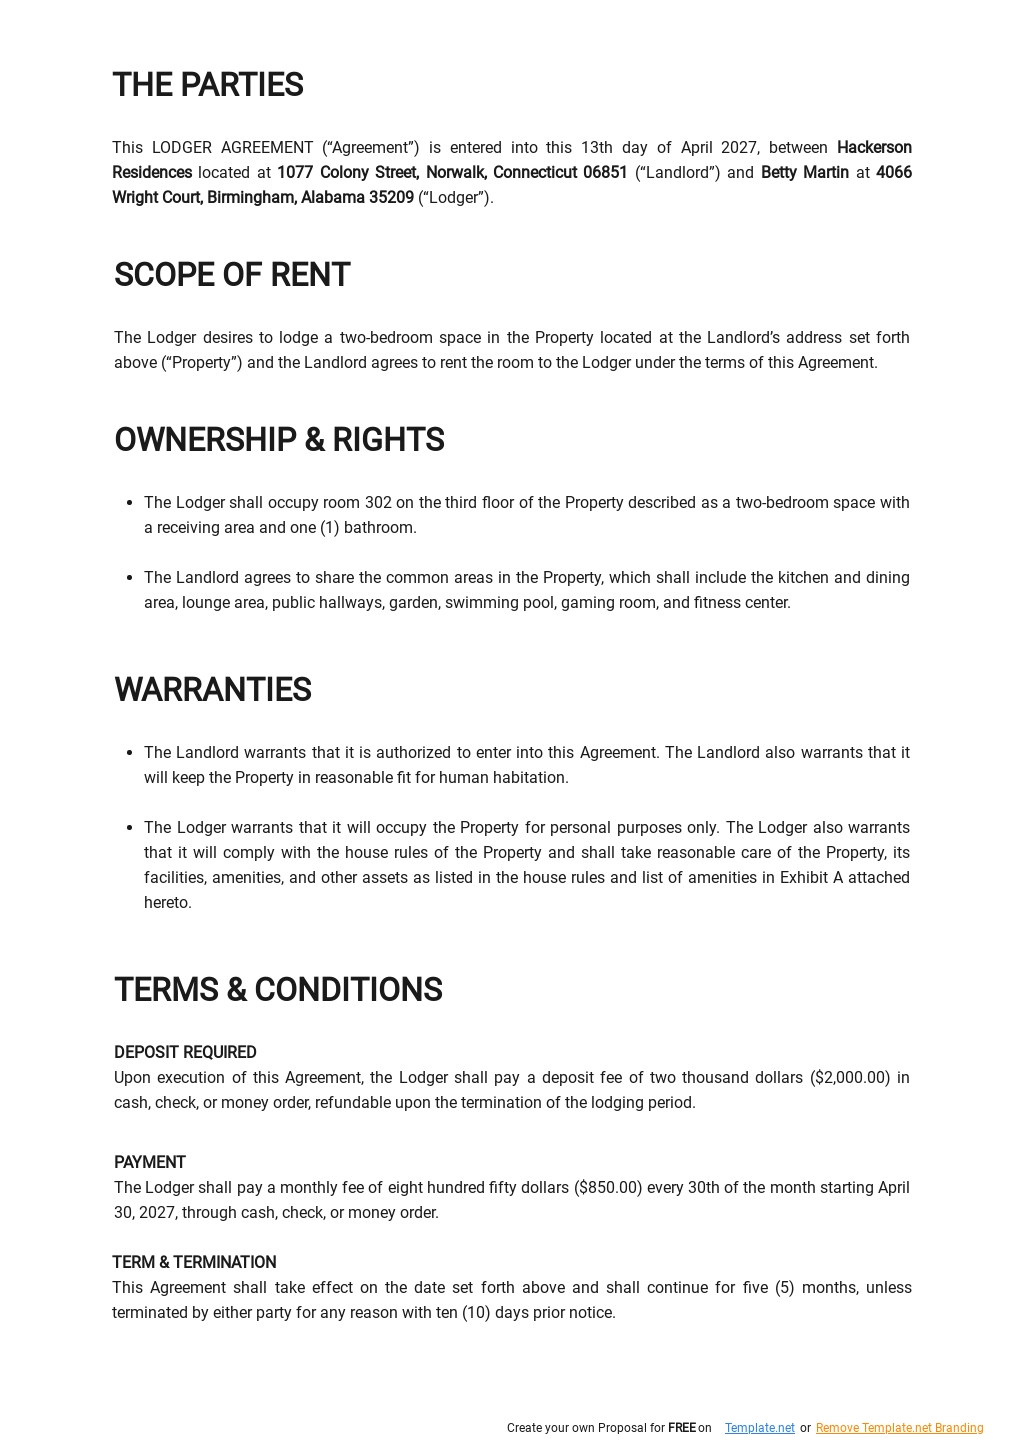 Free Basic Lodger Agreement Template - Google Docs, Word Intended For landlord lodger agreement template